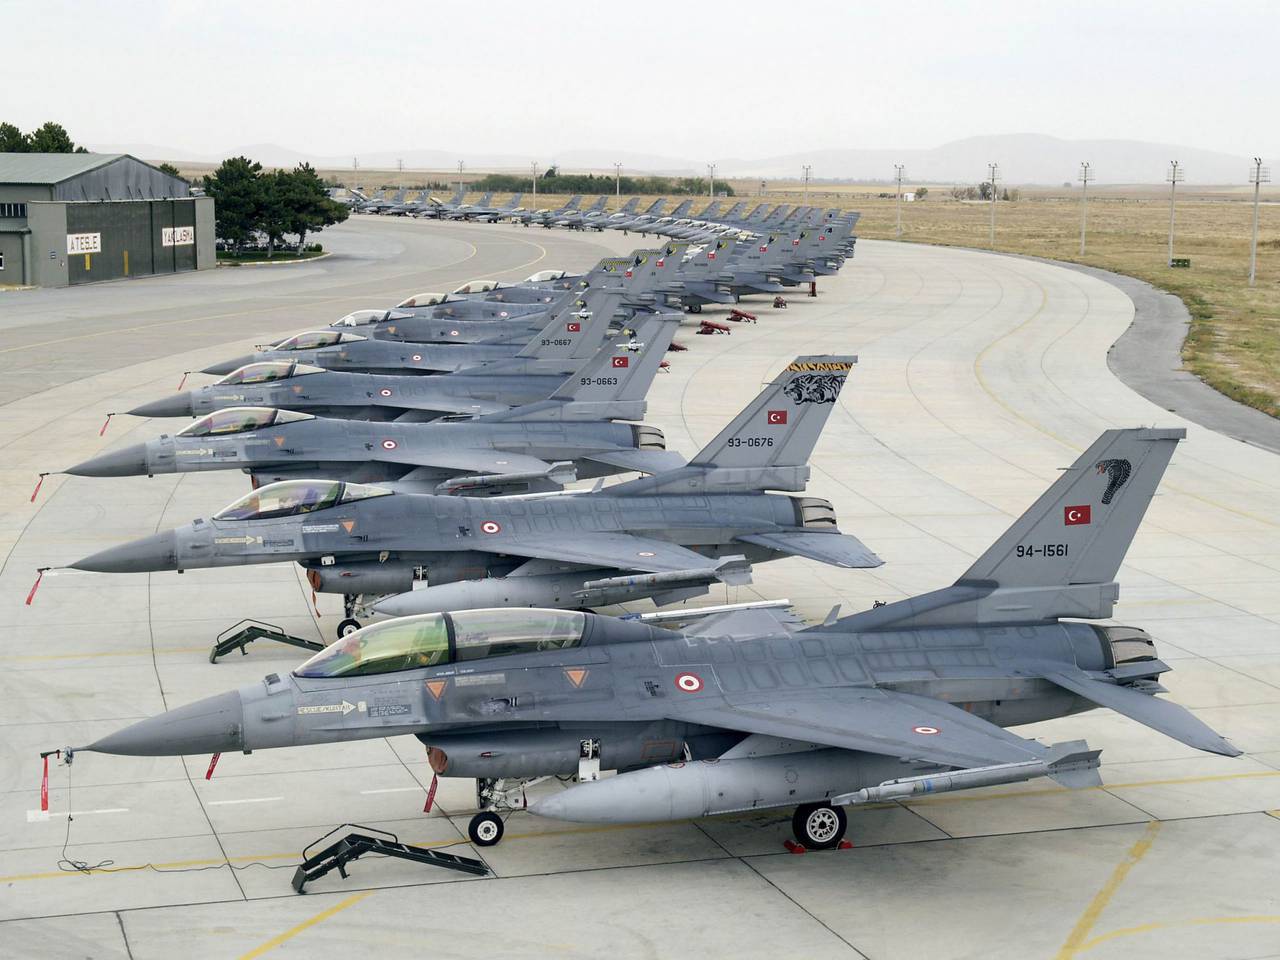 Iran Flaunts American Phantom Jets That Can Take-Off From